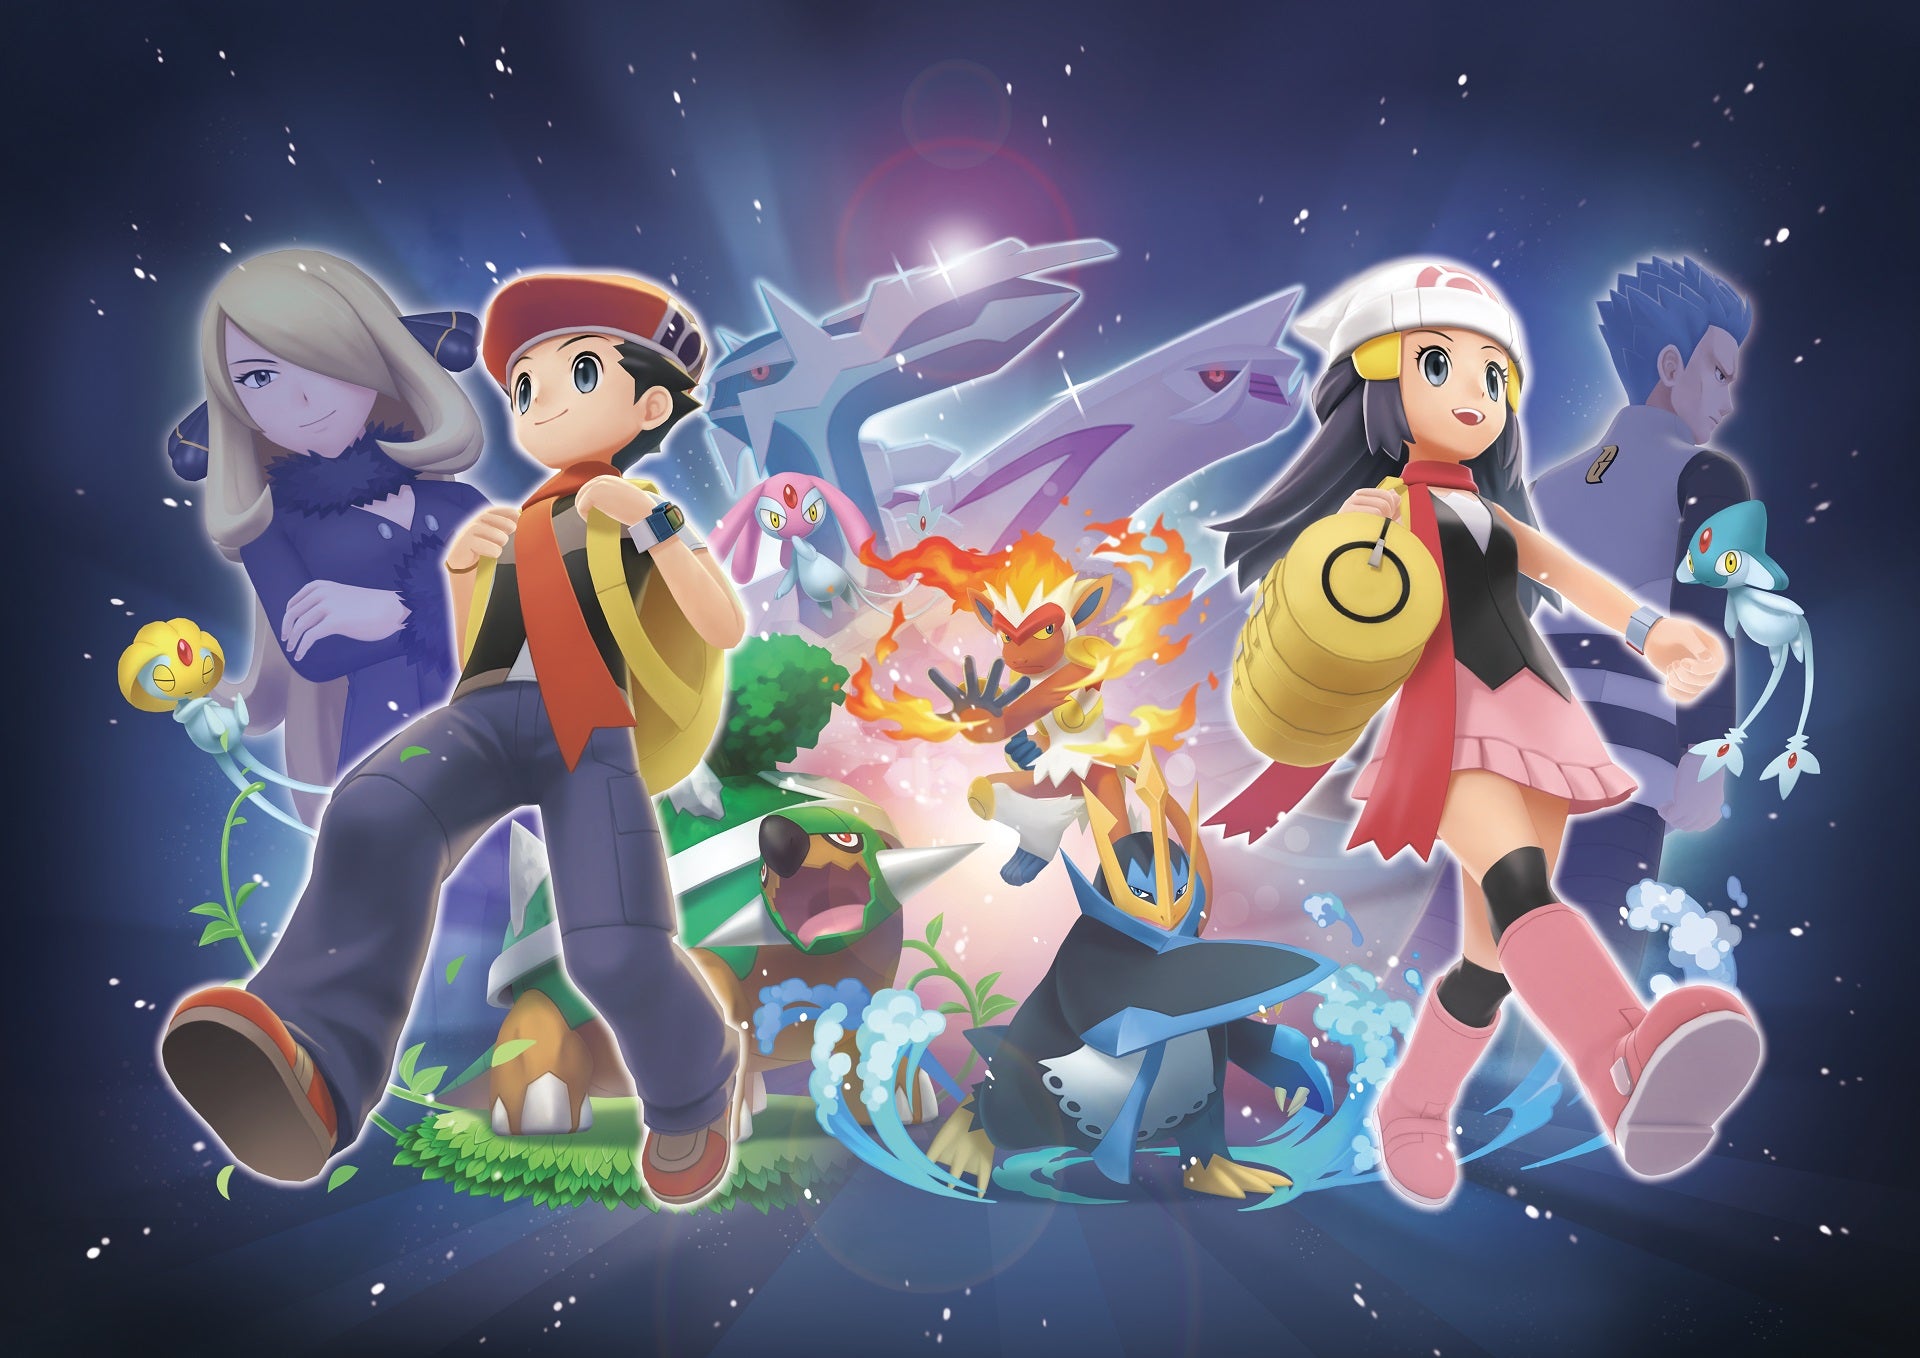 Pokémon Brilliant Diamond and Shining Pearl are fine remakes, but play it so safe that they don't feel quite as magical as the source material. (Image: The Pokémon Company)